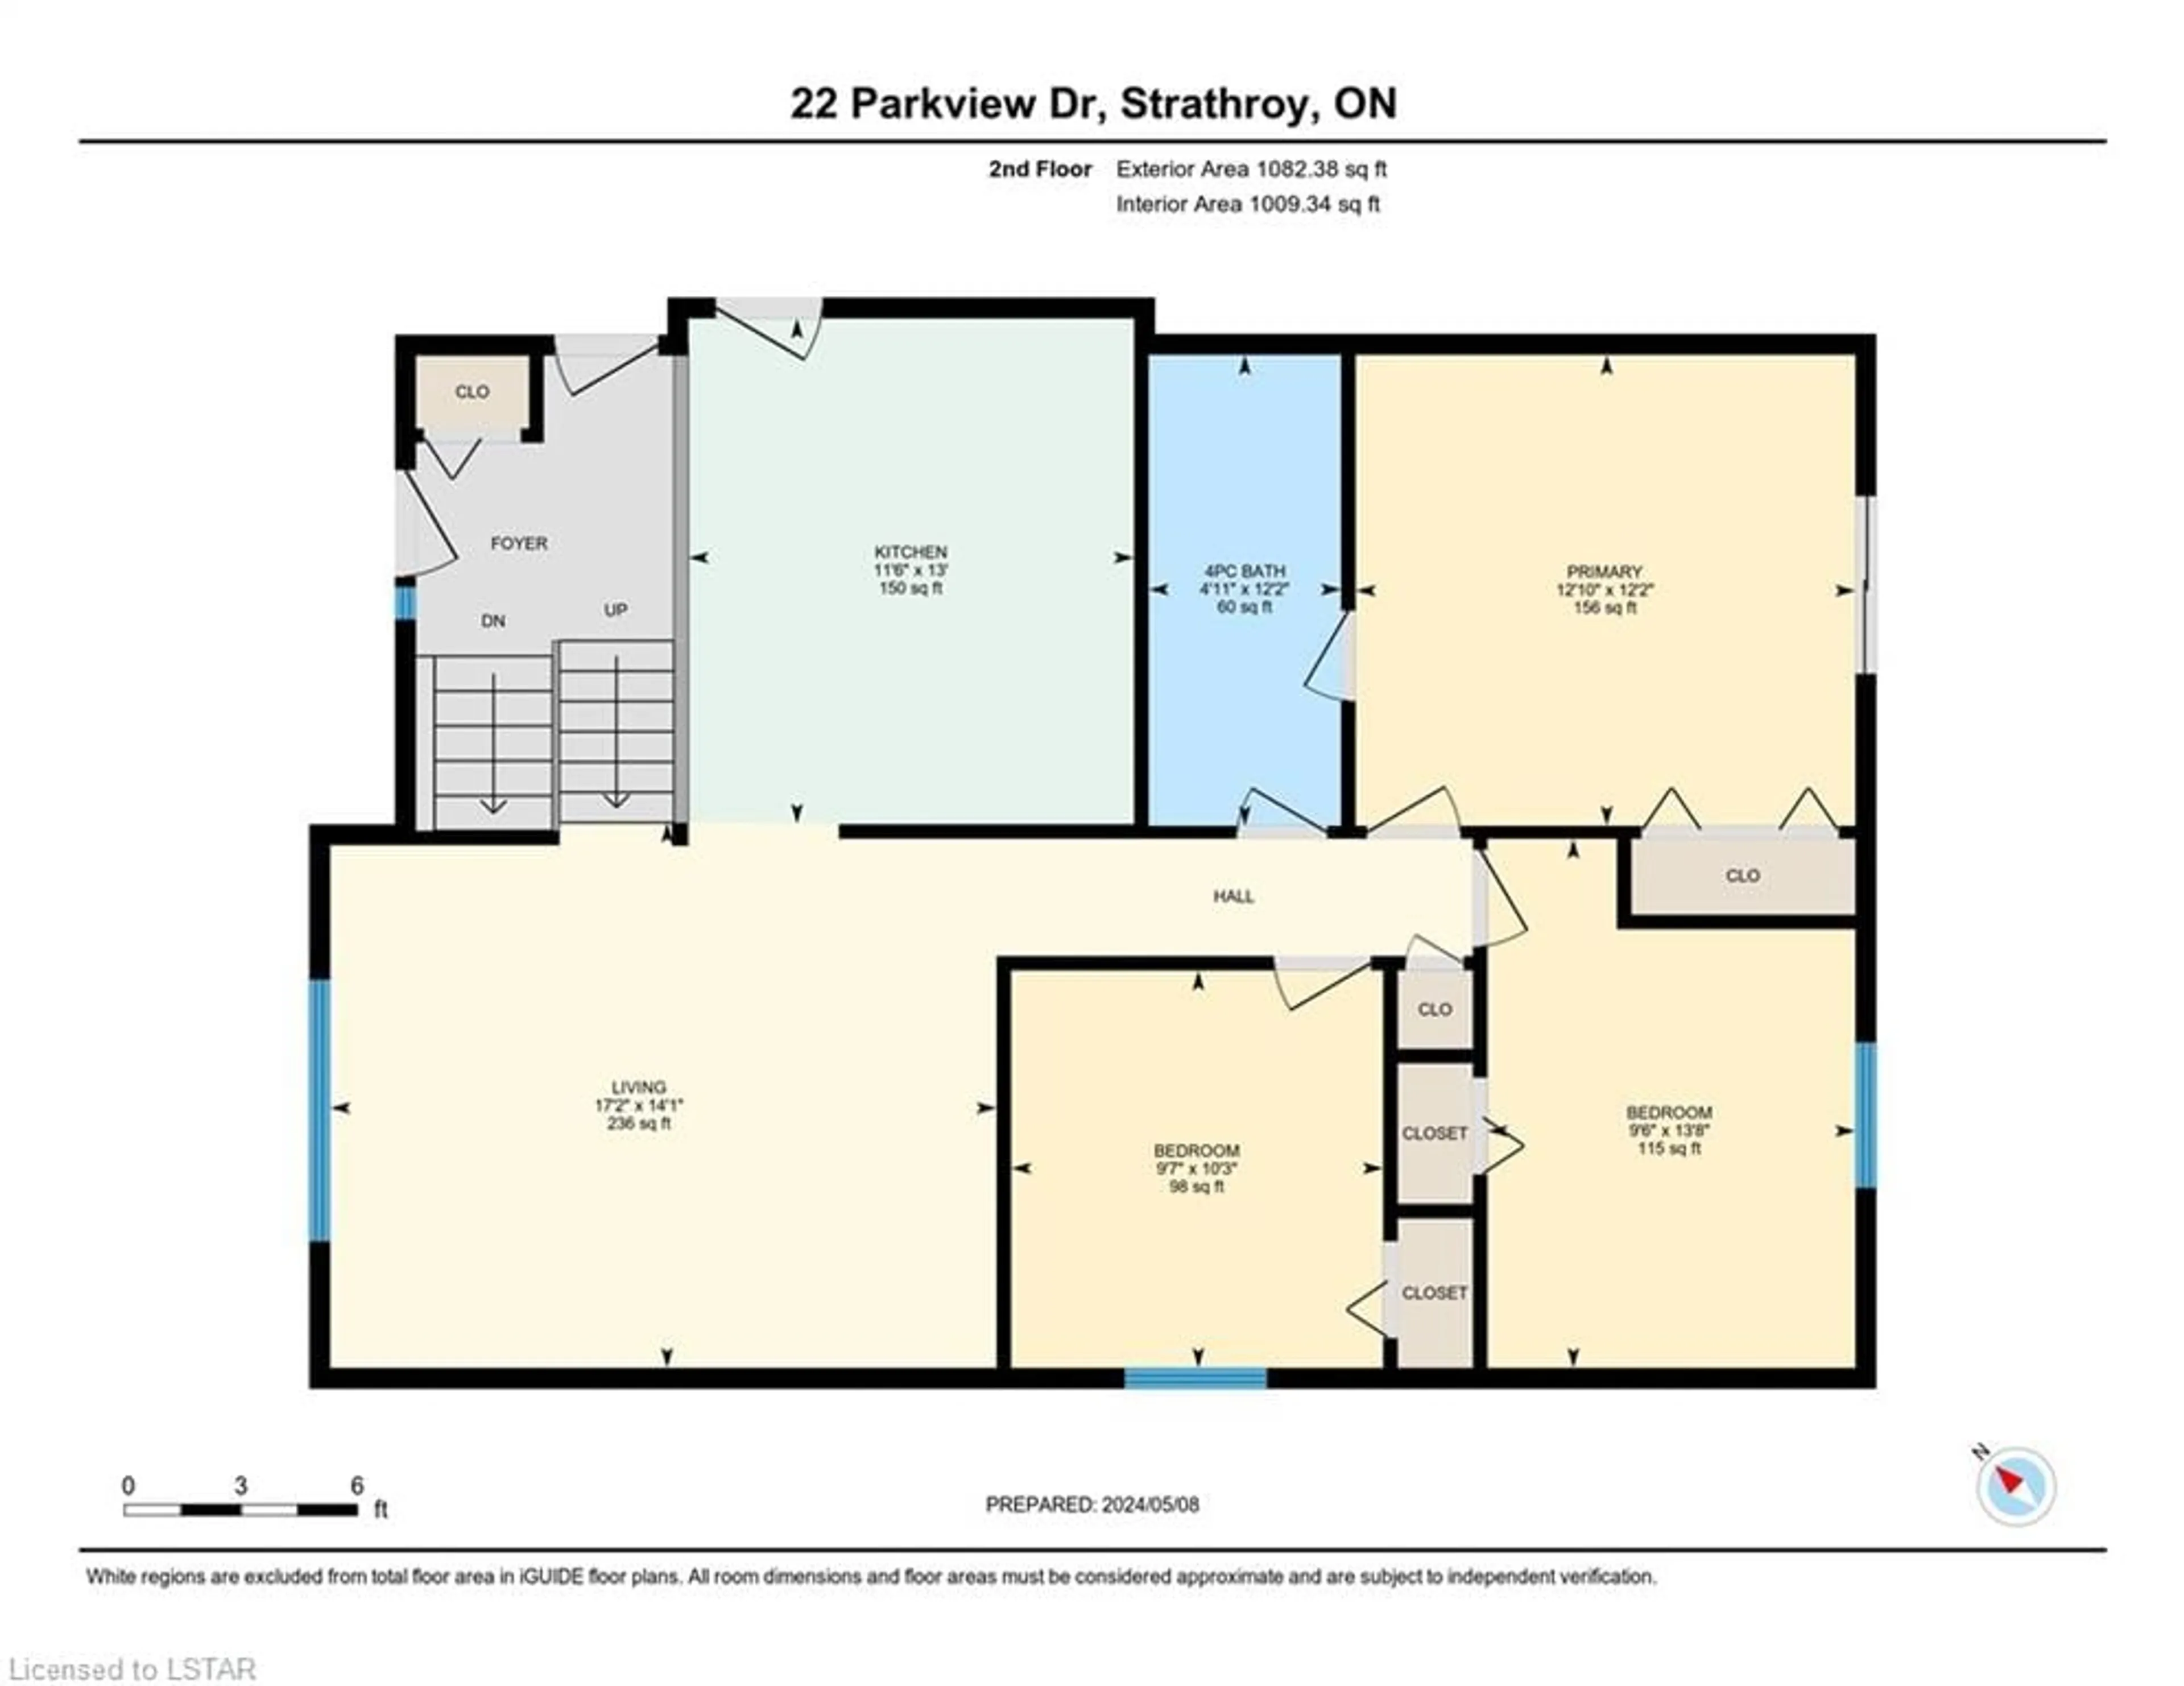 Floor plan for 22 Parkview Dr, Strathroy Ontario N7G 4A1